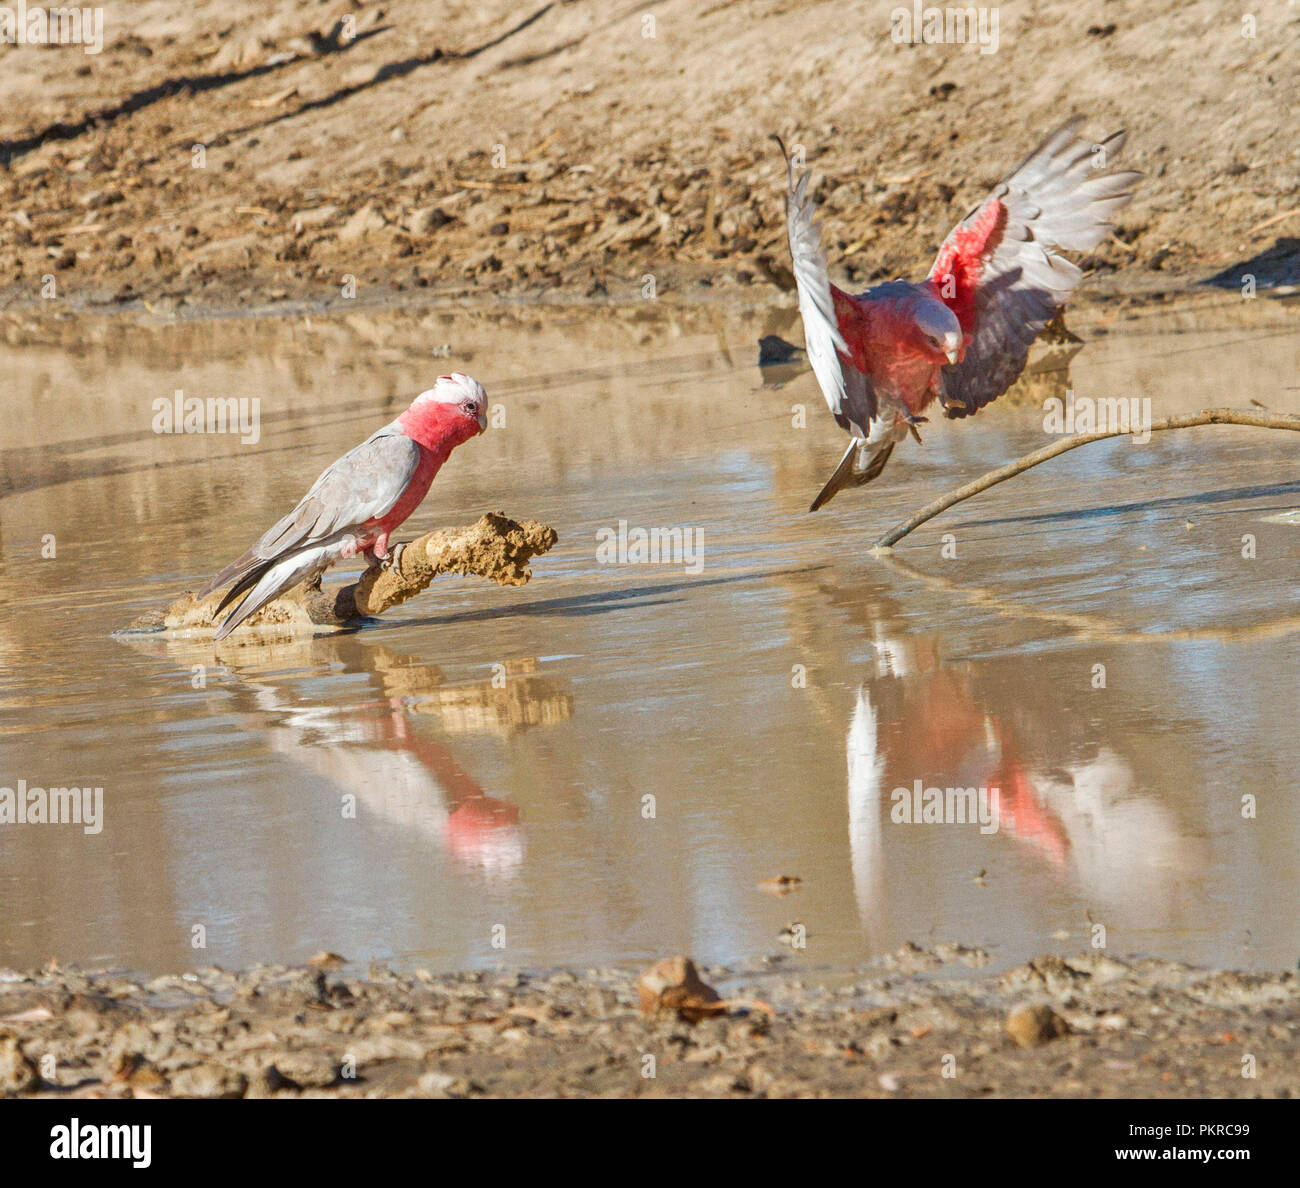 Pink and grey Australian Galahs Eolophus roseicapillus with one on log & another in flight both reflected in calm water of creek in outback Queensland Stock Photo